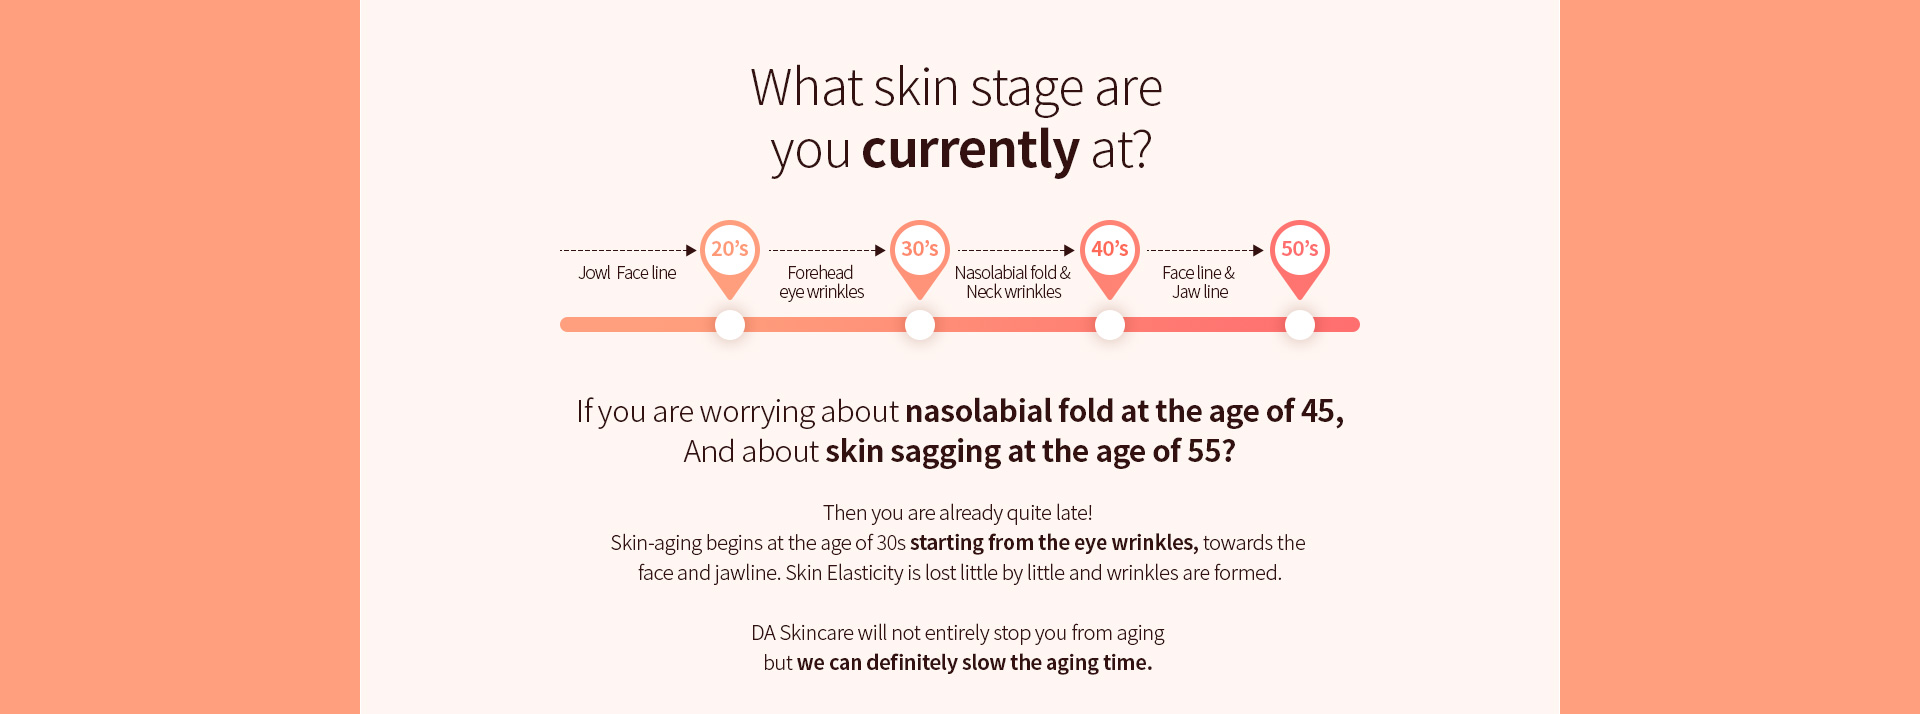 Then you are already quite late! Skin-aging begins at the age of 30s starting from the eye wrinkles, towards the face and jawline. Skin Elasticity is lost little by little and wrinkles are formed.